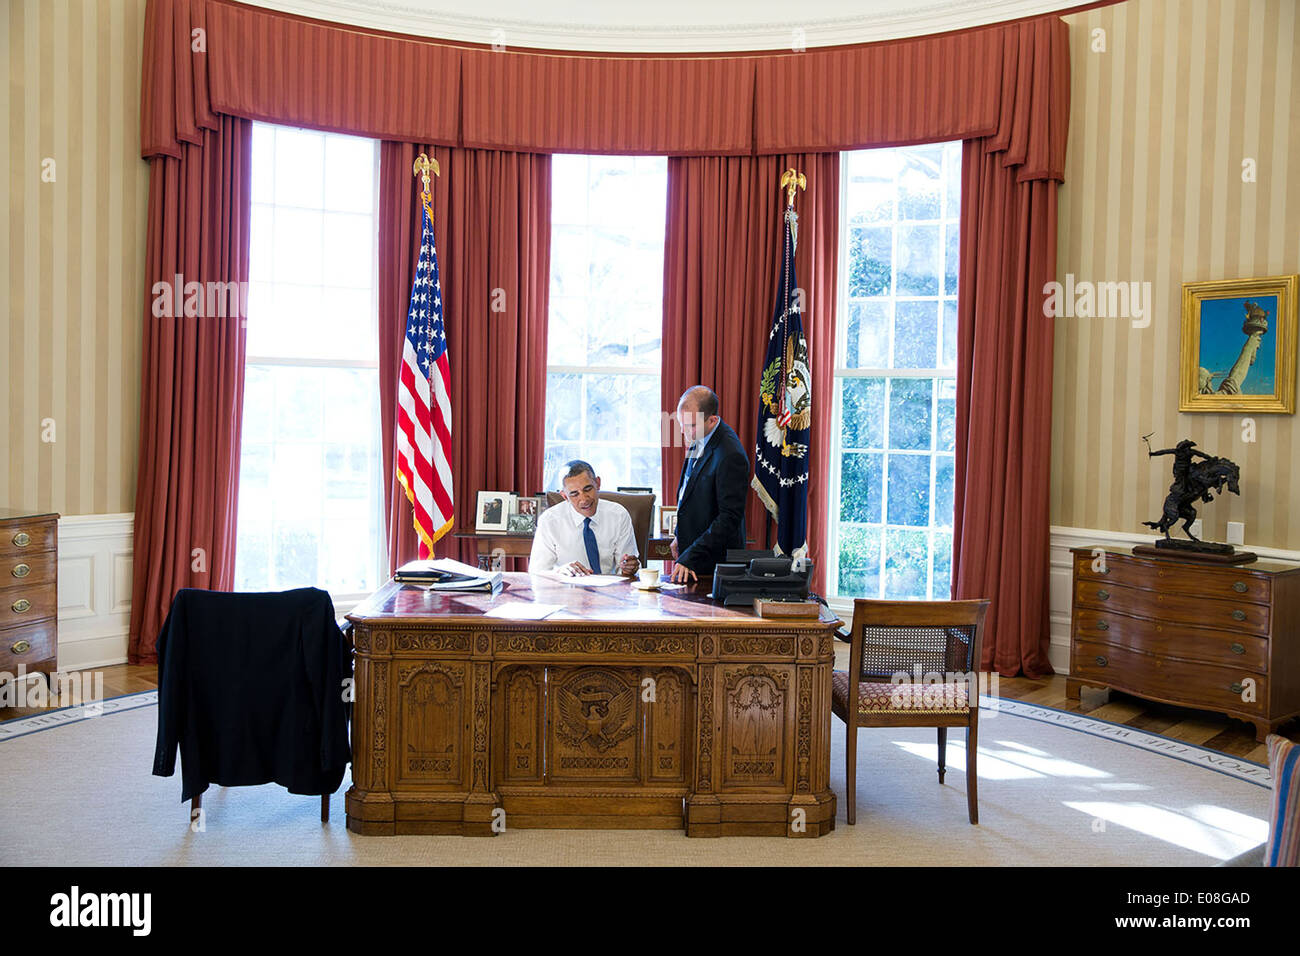 US President Barack Obama works in the Oval Office with Ben Rhodes, Deputy National Security Advisor for Strategic Communications, on remarks on the Administration's review of intelligence programs at the White House January 17, 2014 in Washington, DC. Stock Photo